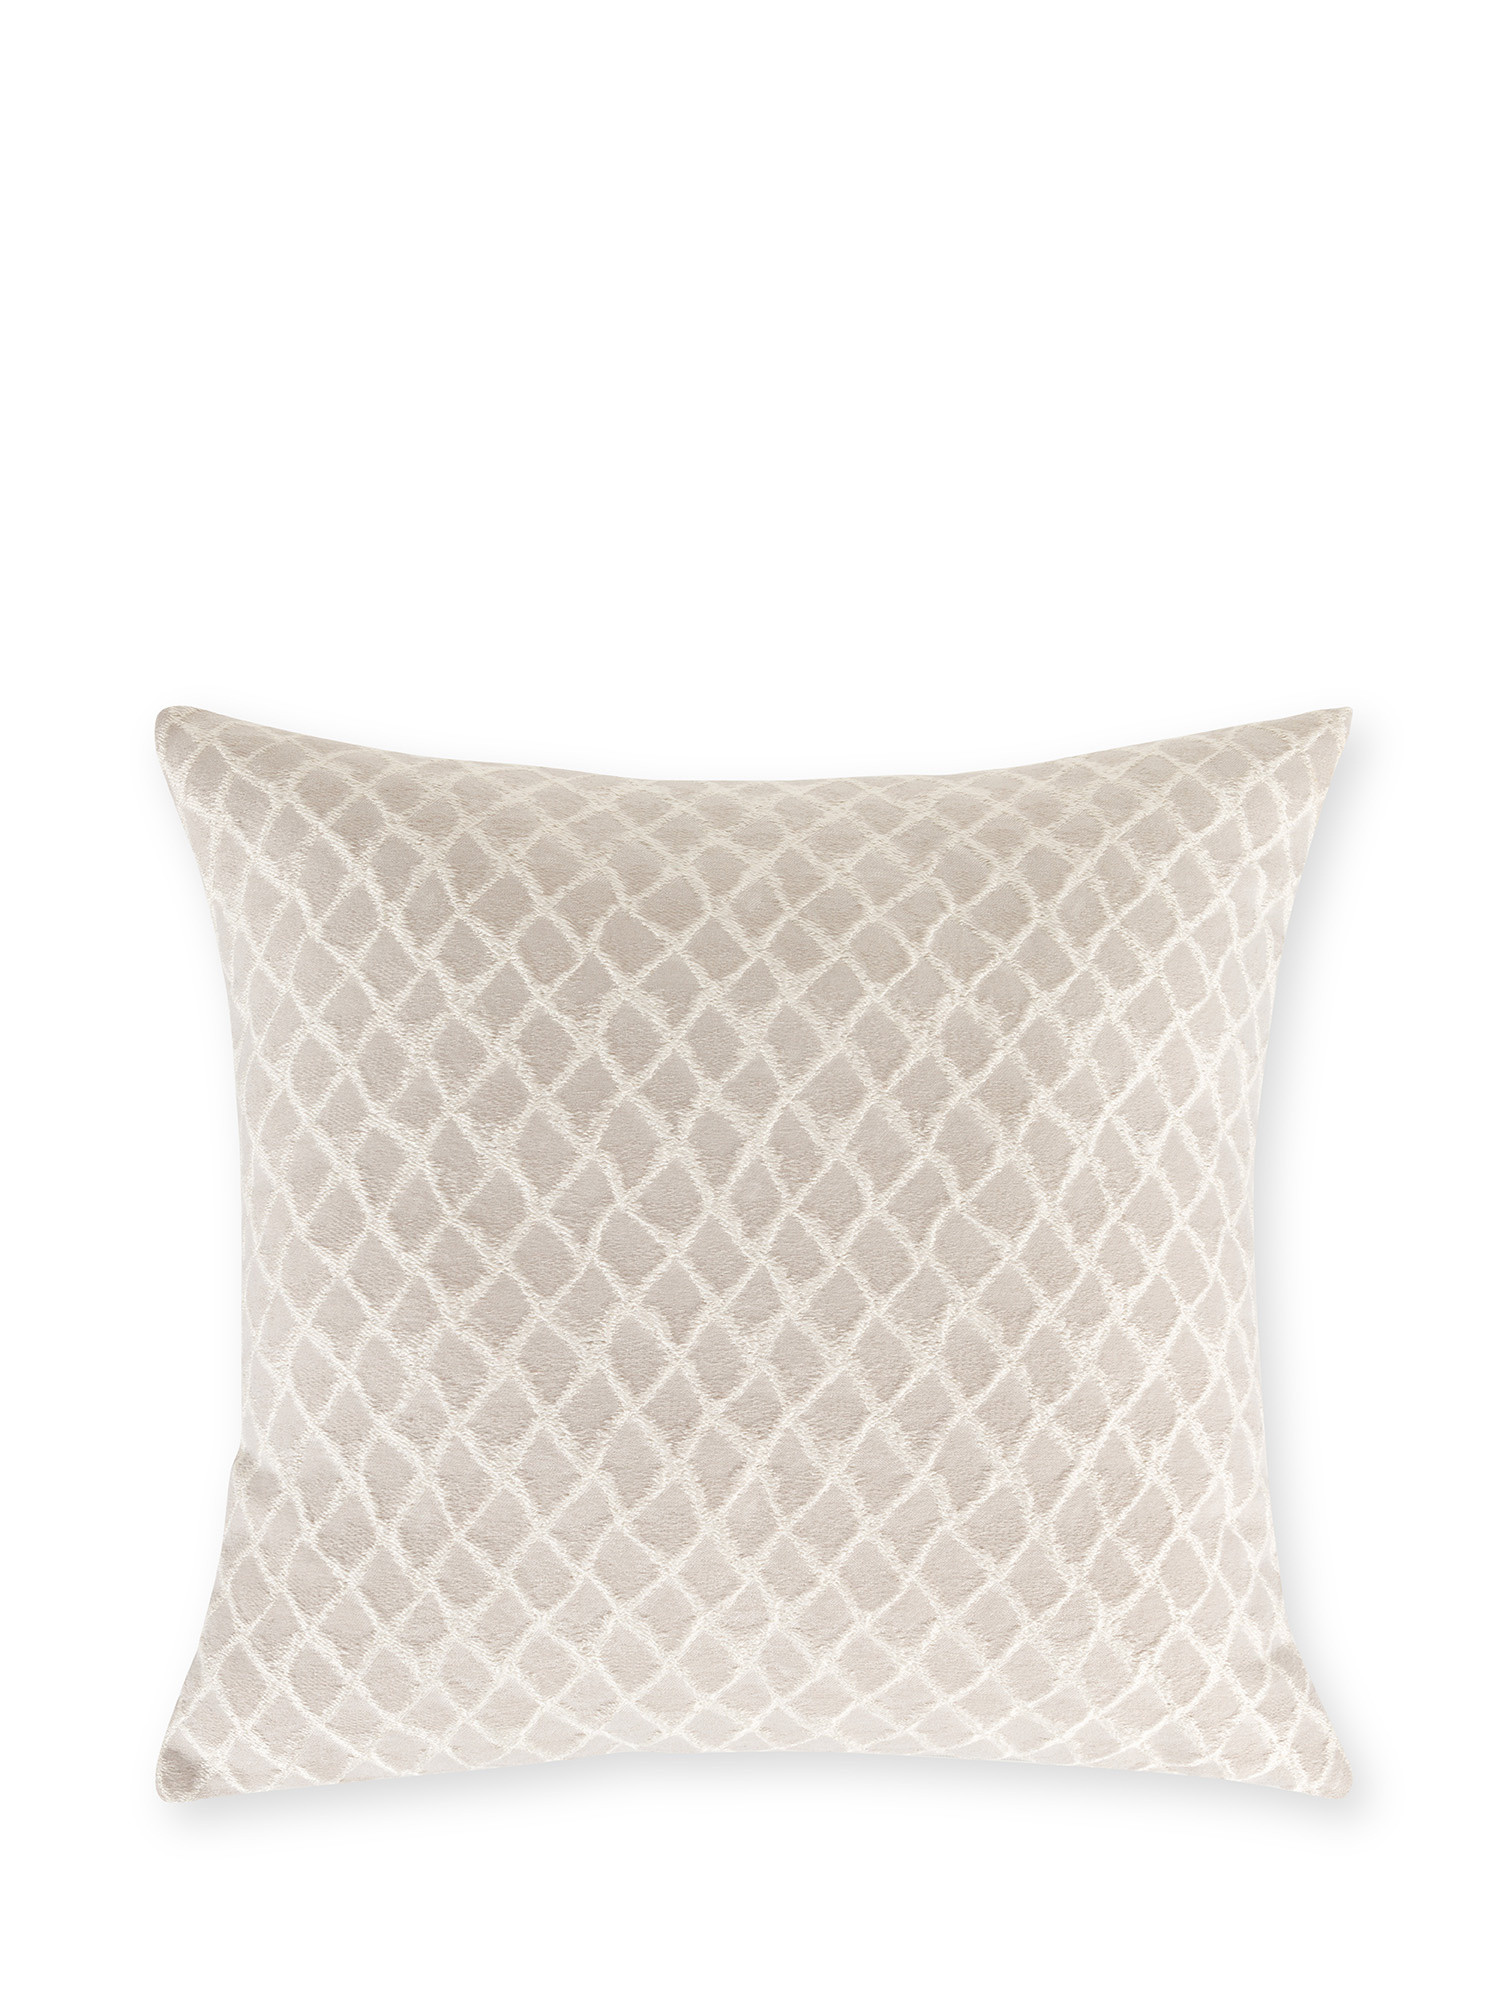 Cushion in jacquard fabric with geometric pattern 45x45 cm, Silver Grey, large image number 1